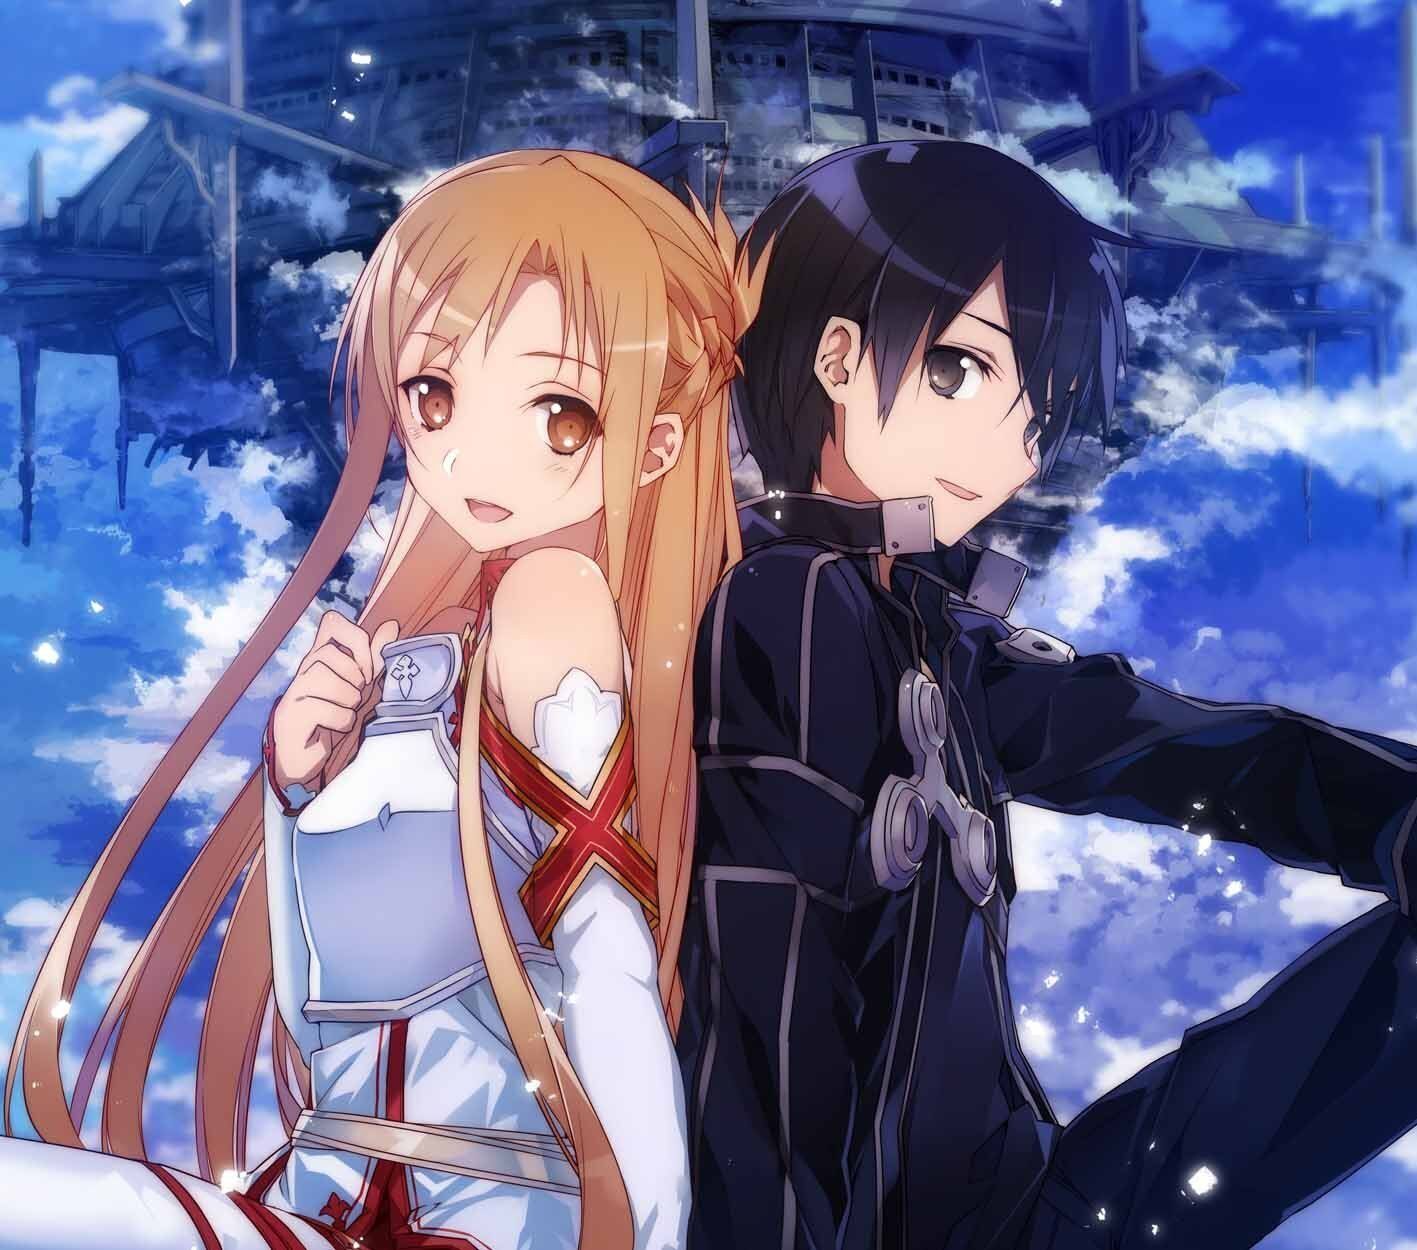 Sword Art Online Music Collection First Limited Edition Soundtrack 4 CD Blu-ray